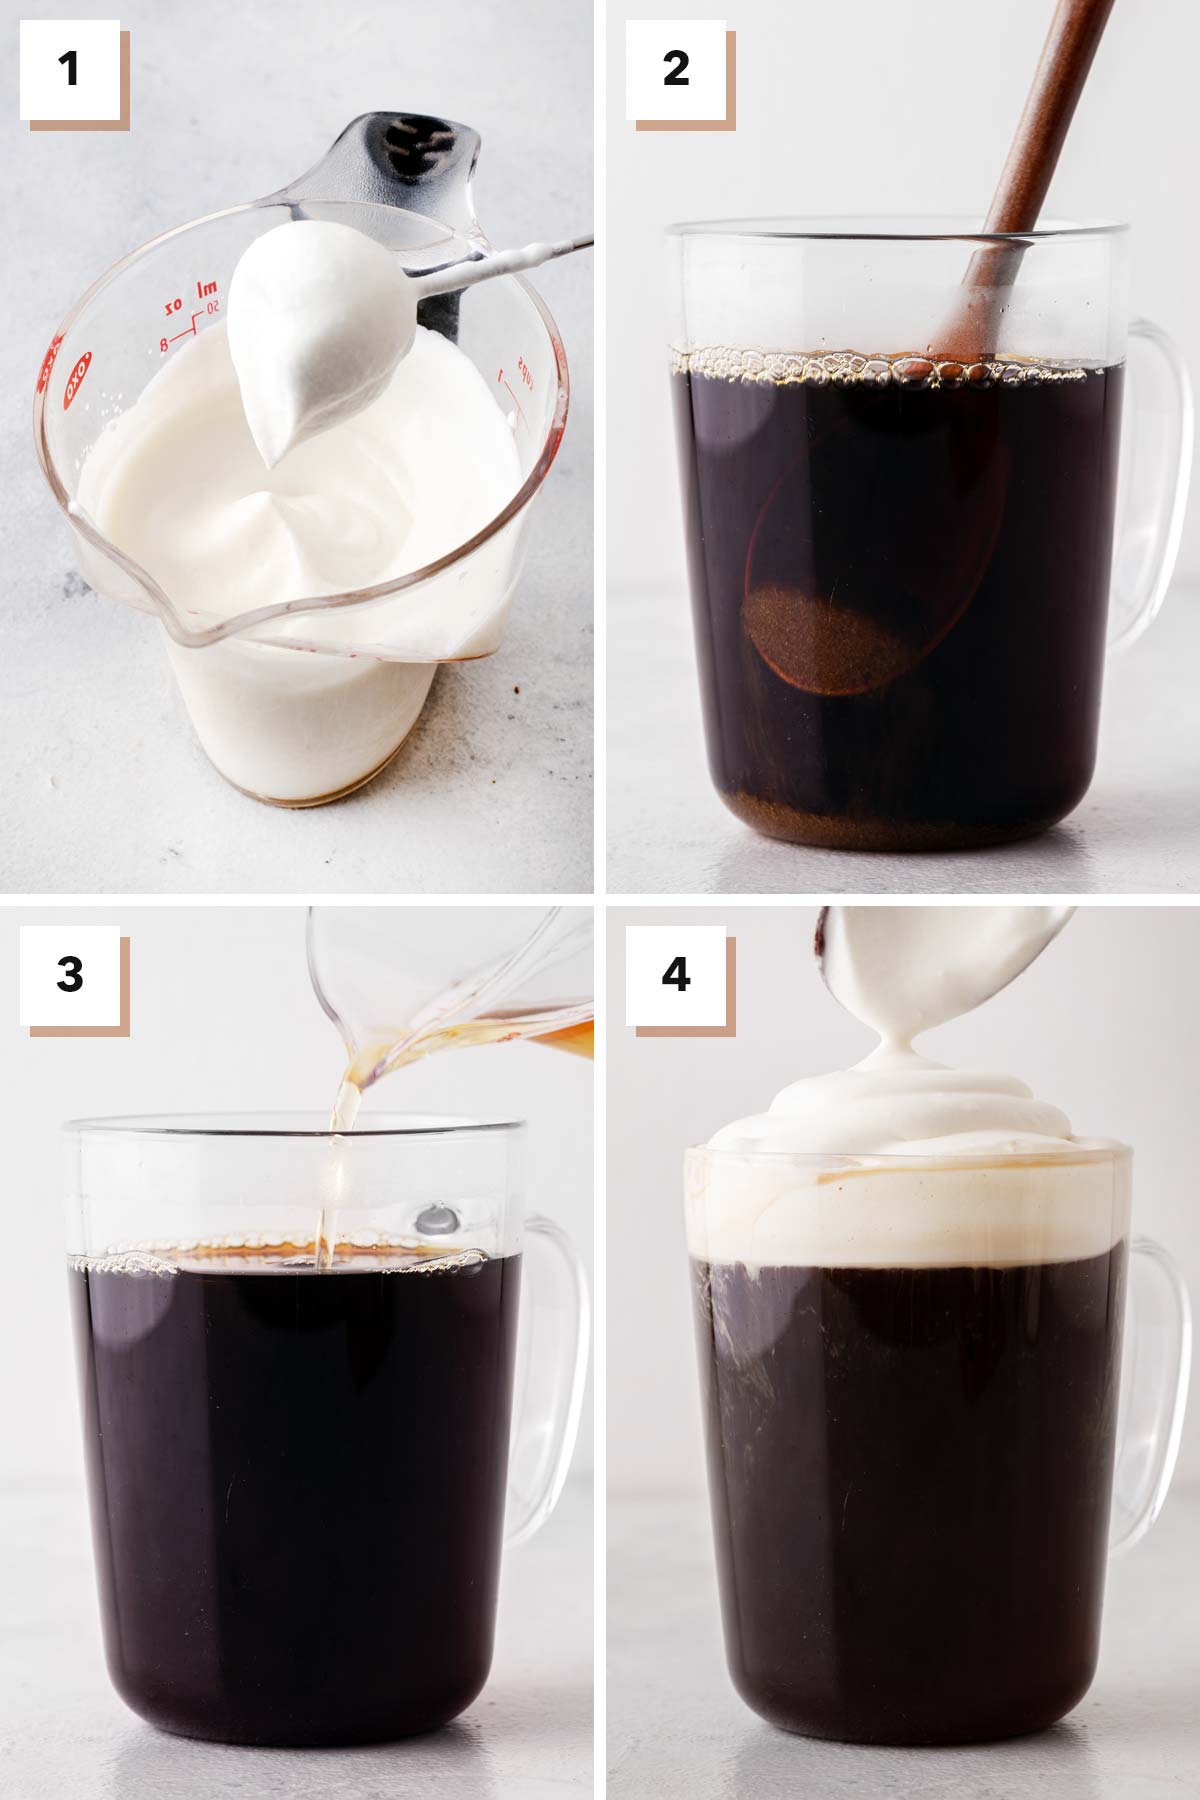 Irish coffee step-by-step directions, four steps